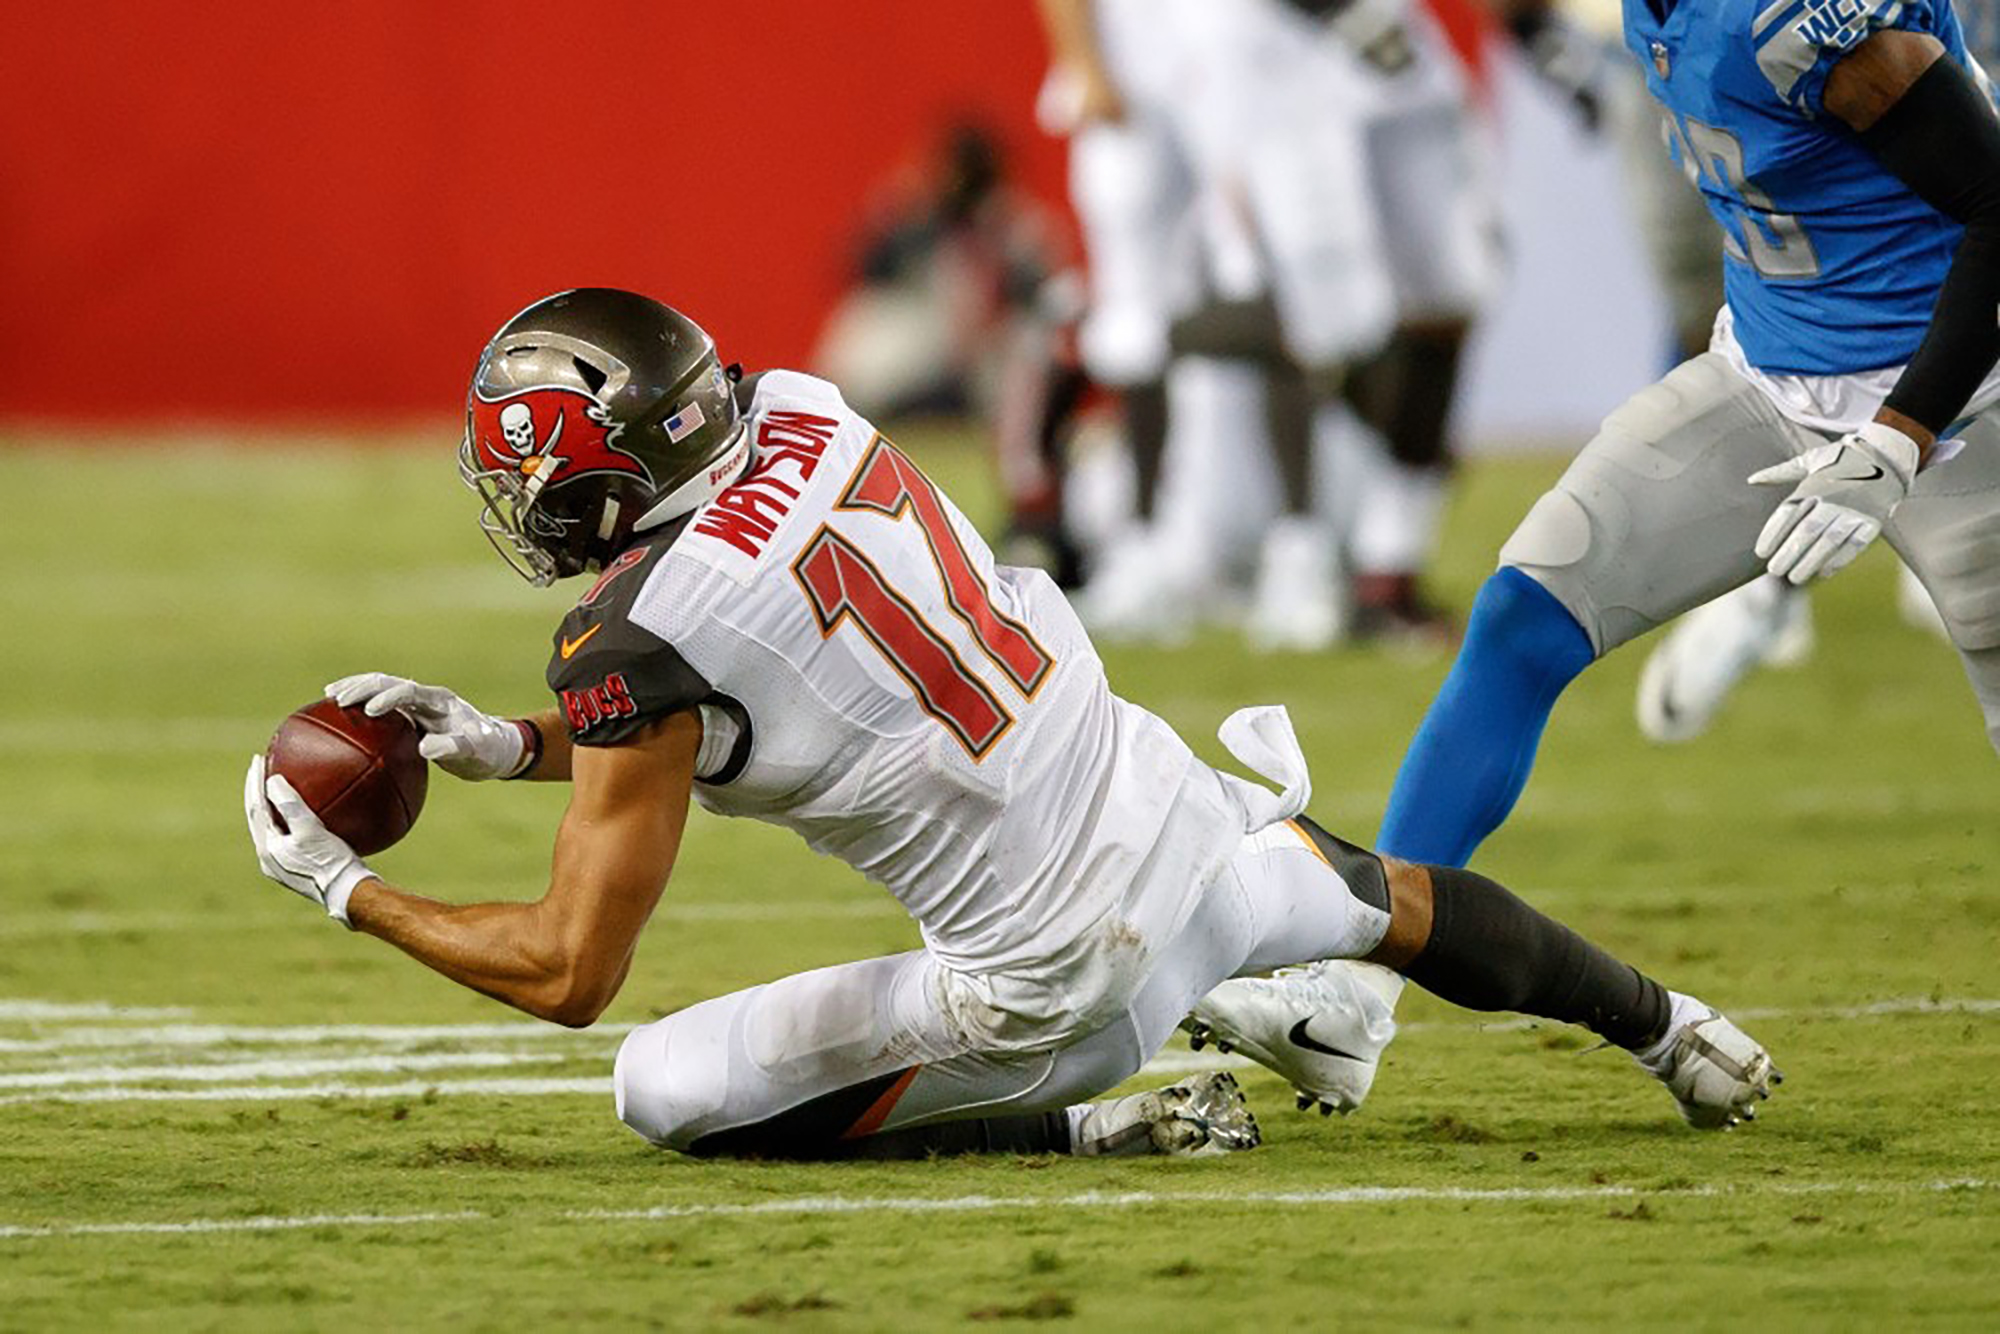 Former Penn wide receiver Justin Watson, now with the Tampa Bay Buccaneers, catches a pass in a preseason game against the Detroit Lions.